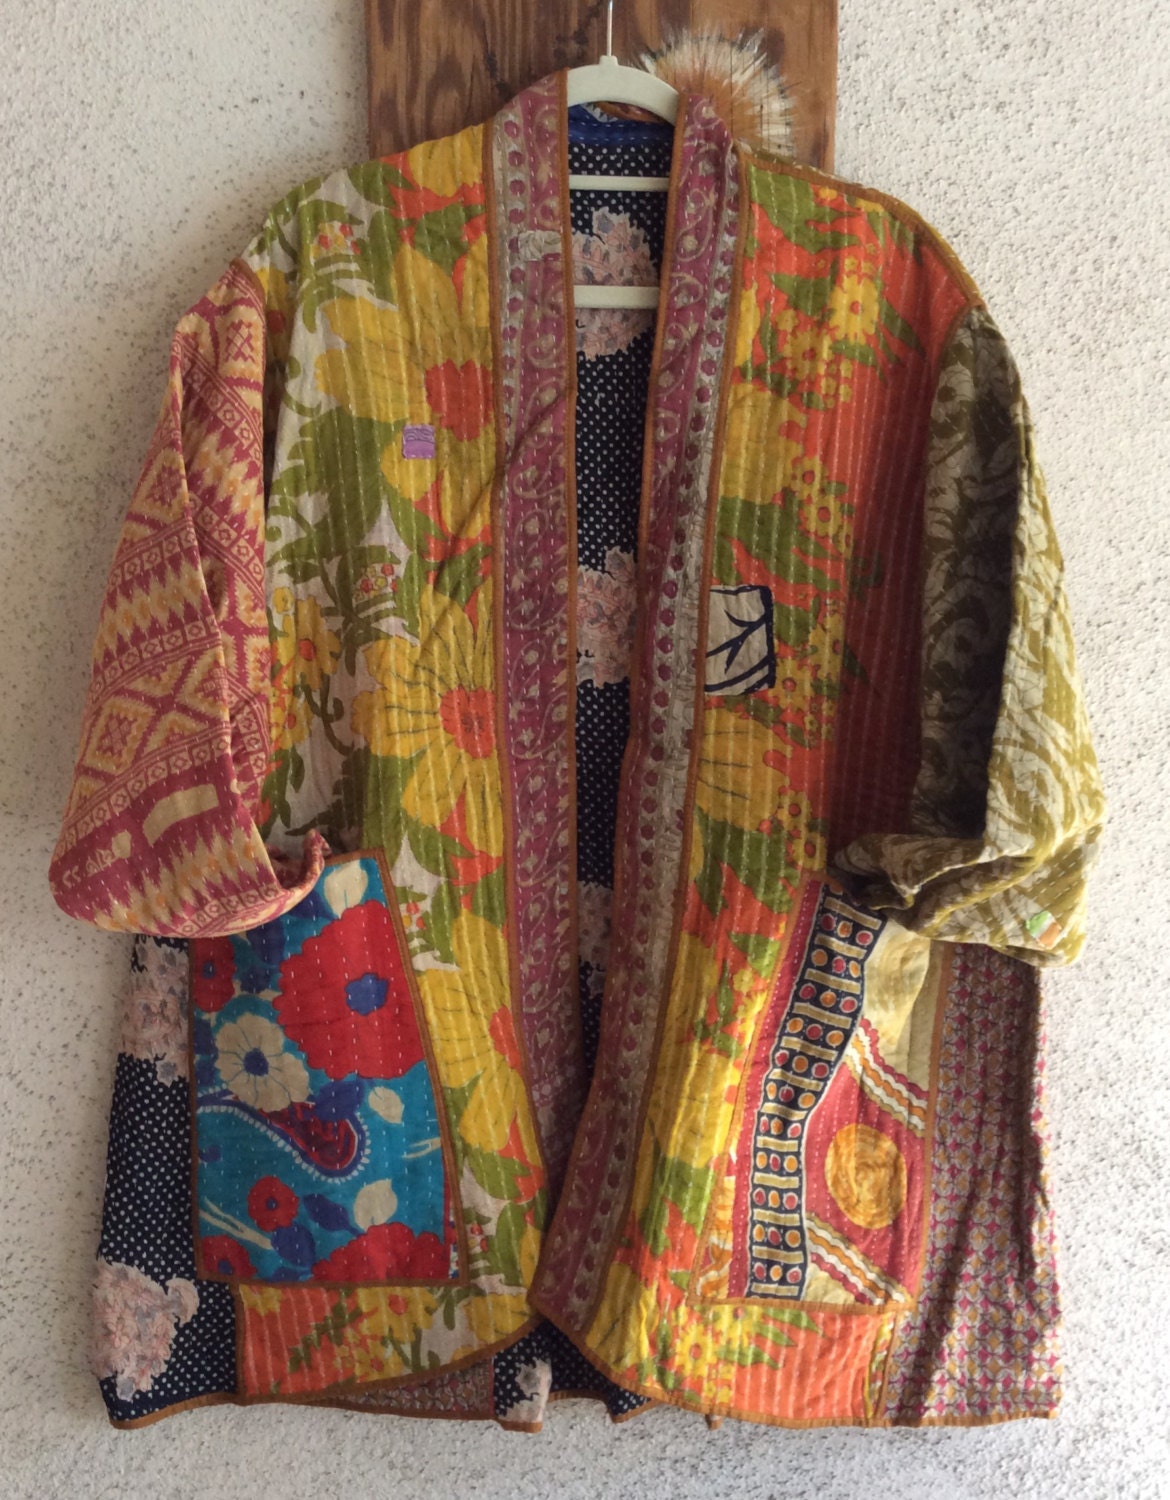 Kantha vintage quilt jacket in plus size by leeza888 on Etsy